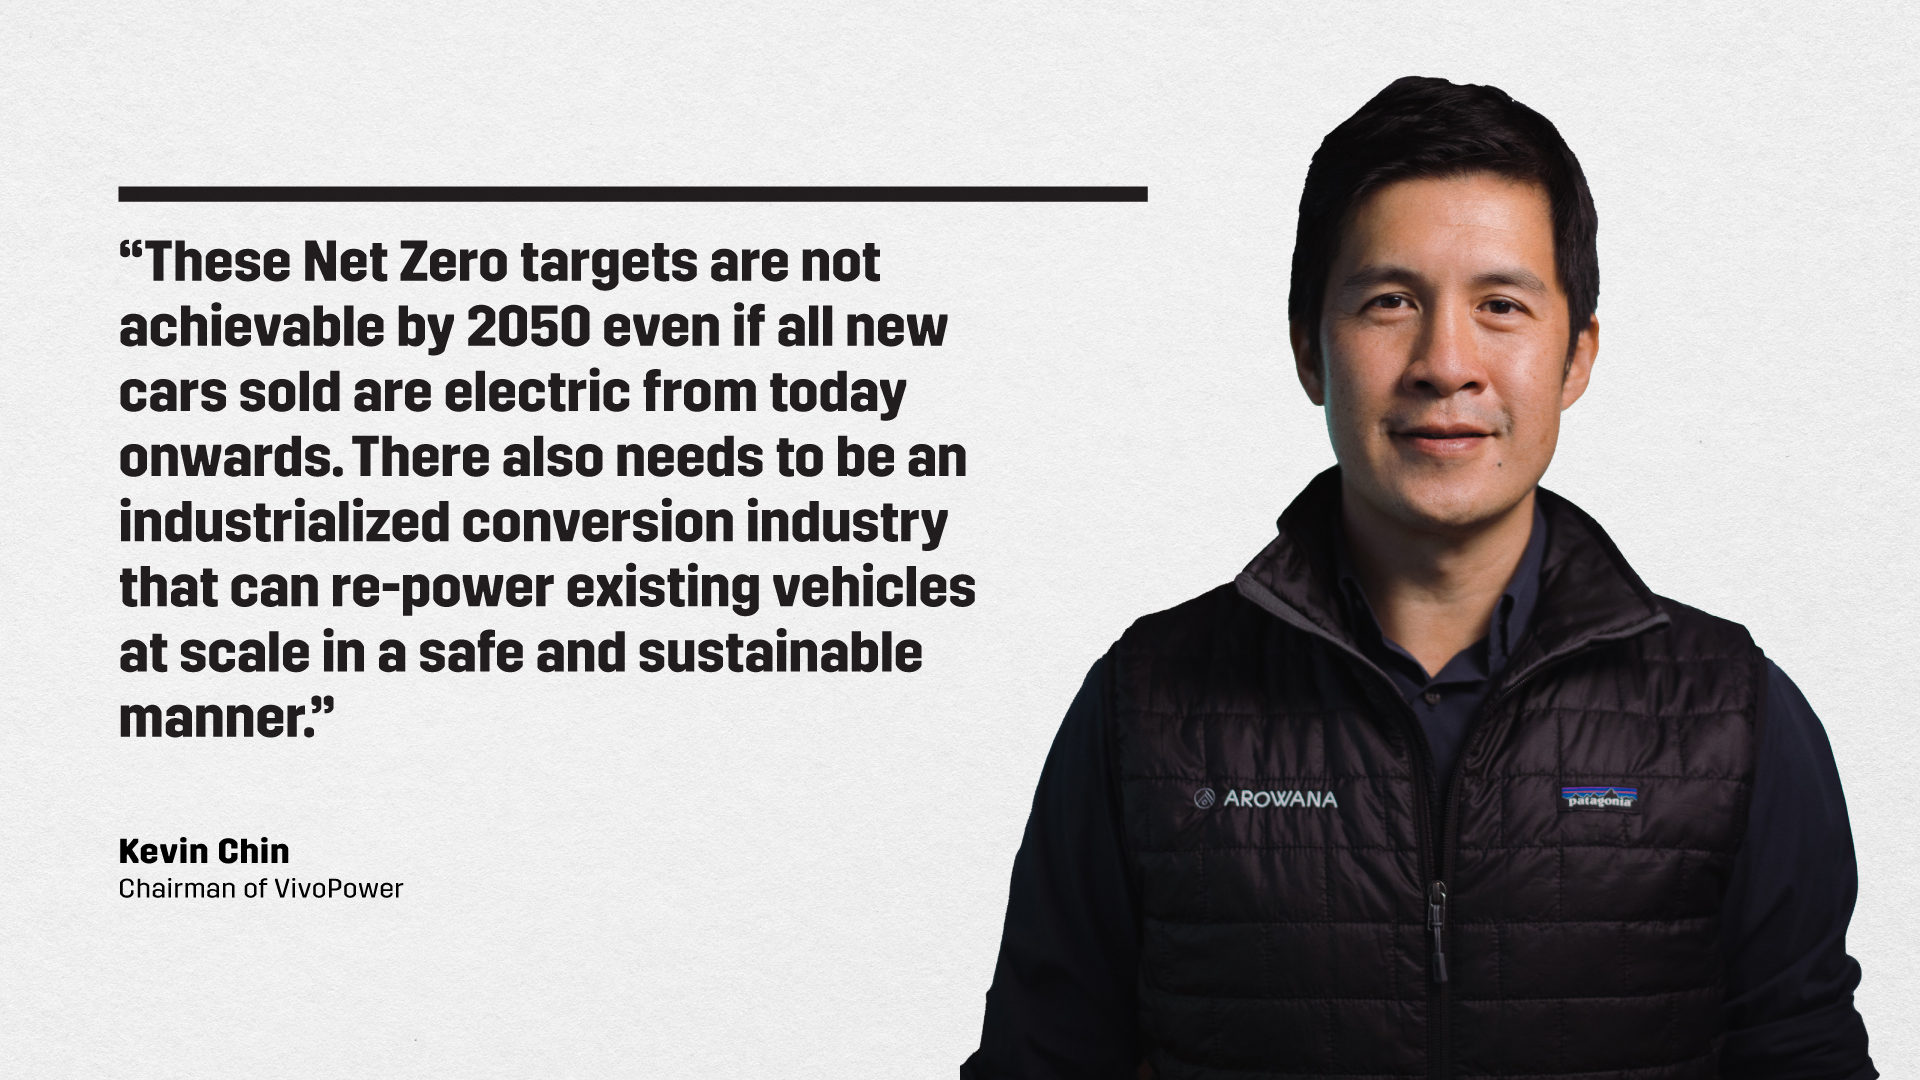 Quote by Kevin Chin, Chairman at VivoPower